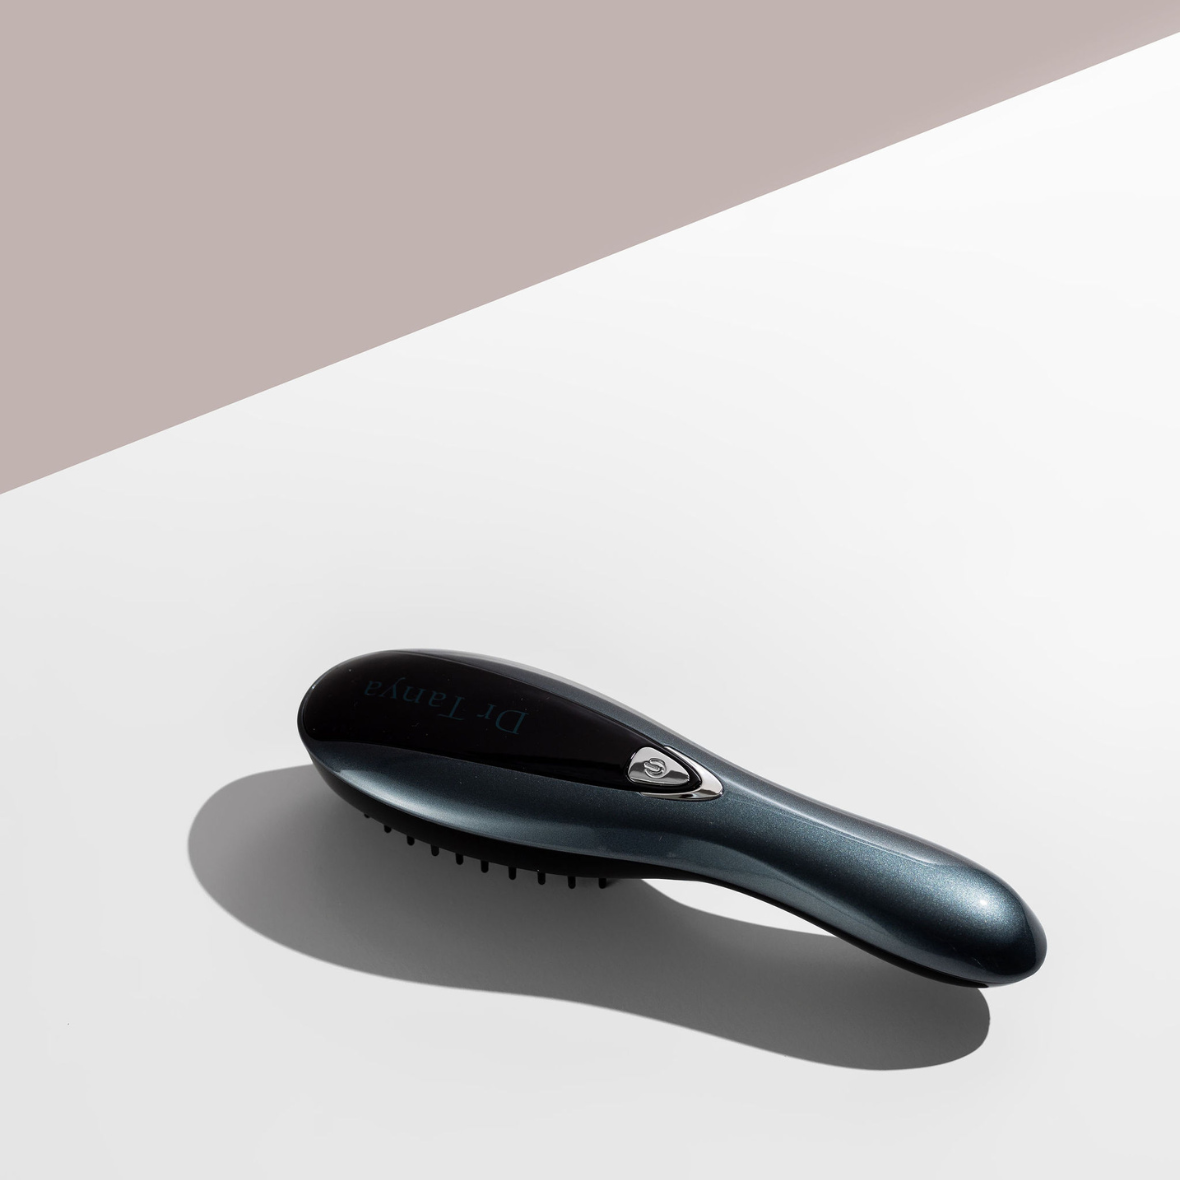 A black vibrating hair brush lying face down on a white surface